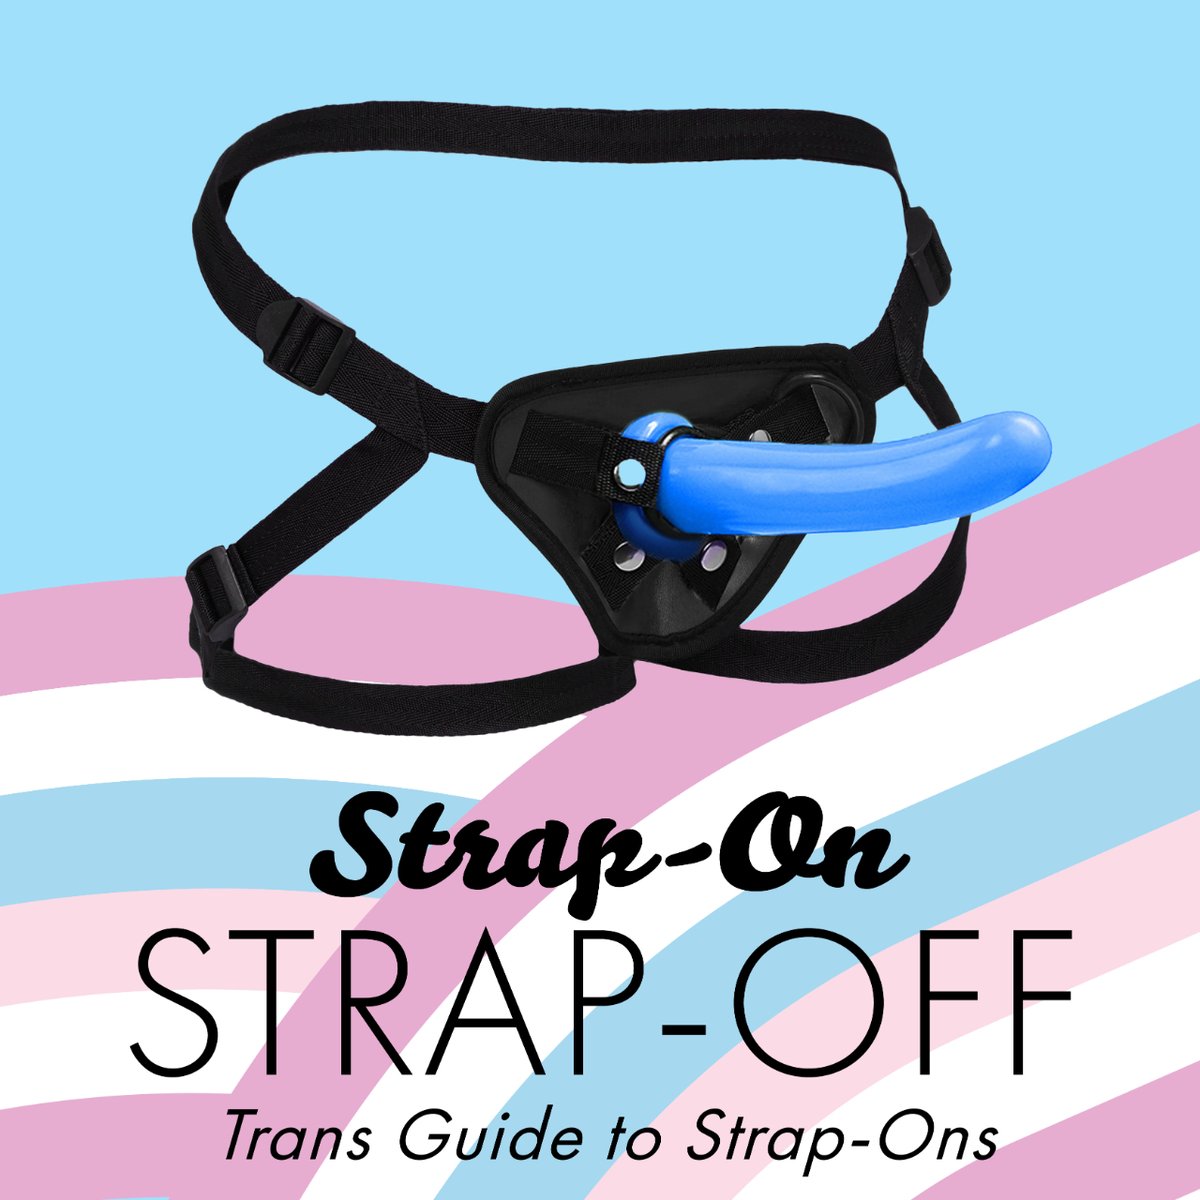 One of our amazing team members has shared their experience and advice with a guide to Strap-Ons for the Trans Community. Get comfy; it's an insightful read! 🏳️⚧️✨ #ProwlerBlog #ExploreDesire #StrapOnSecrets